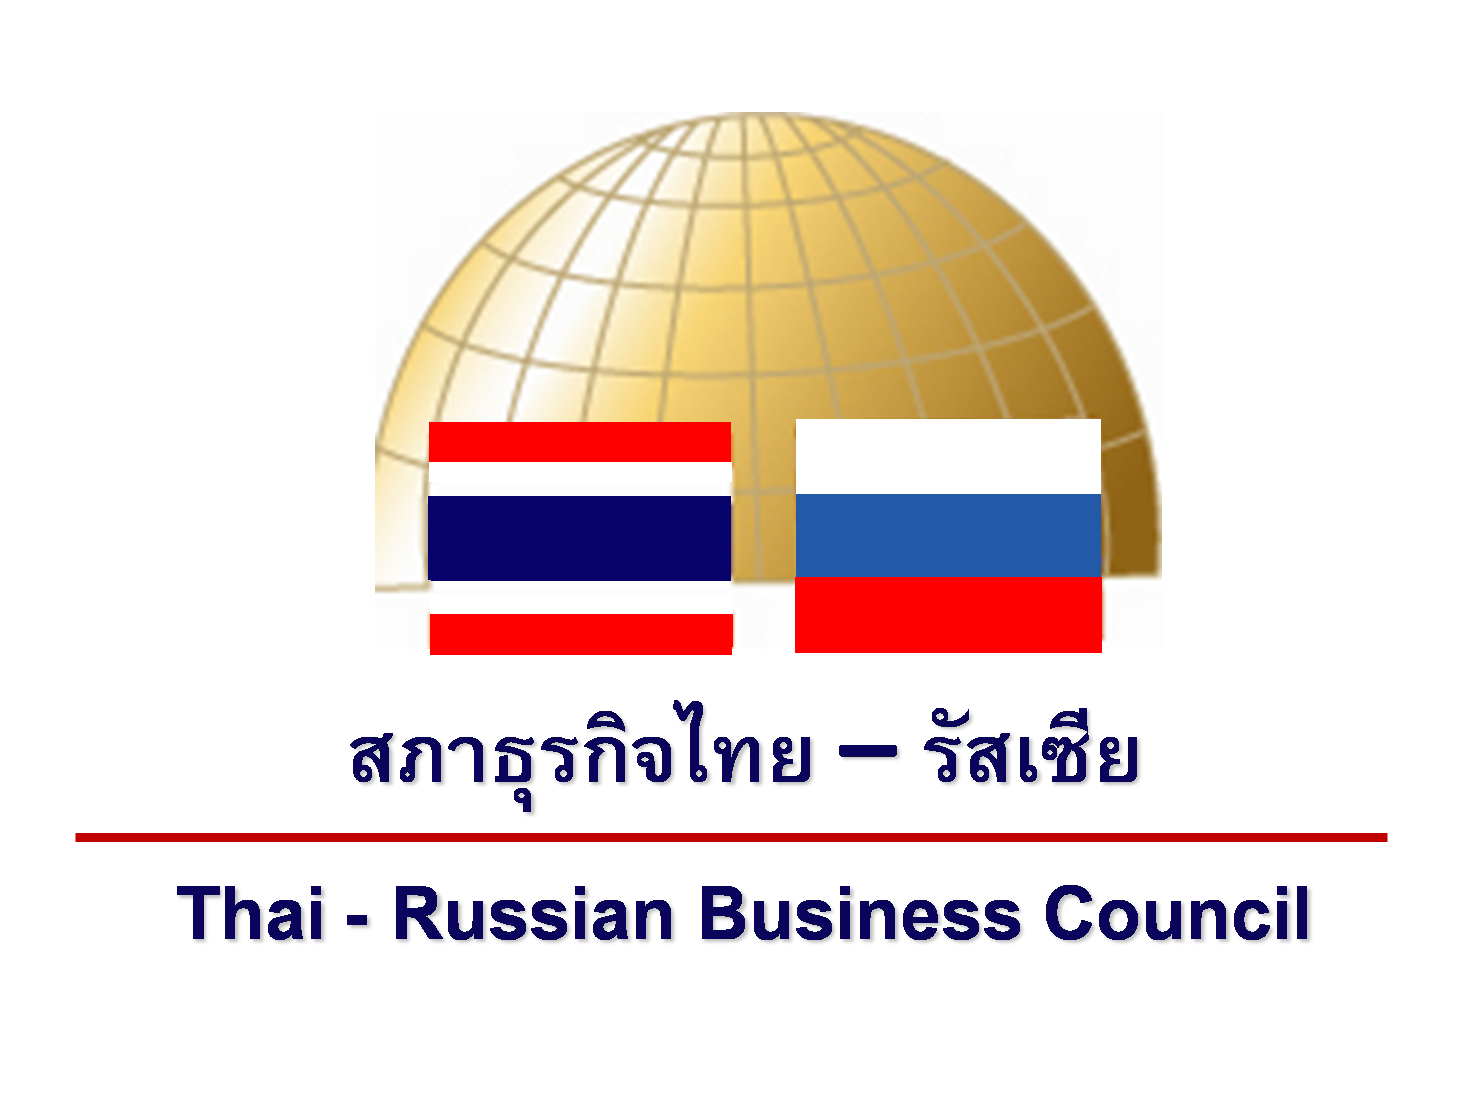 The Federation of Thai Industries